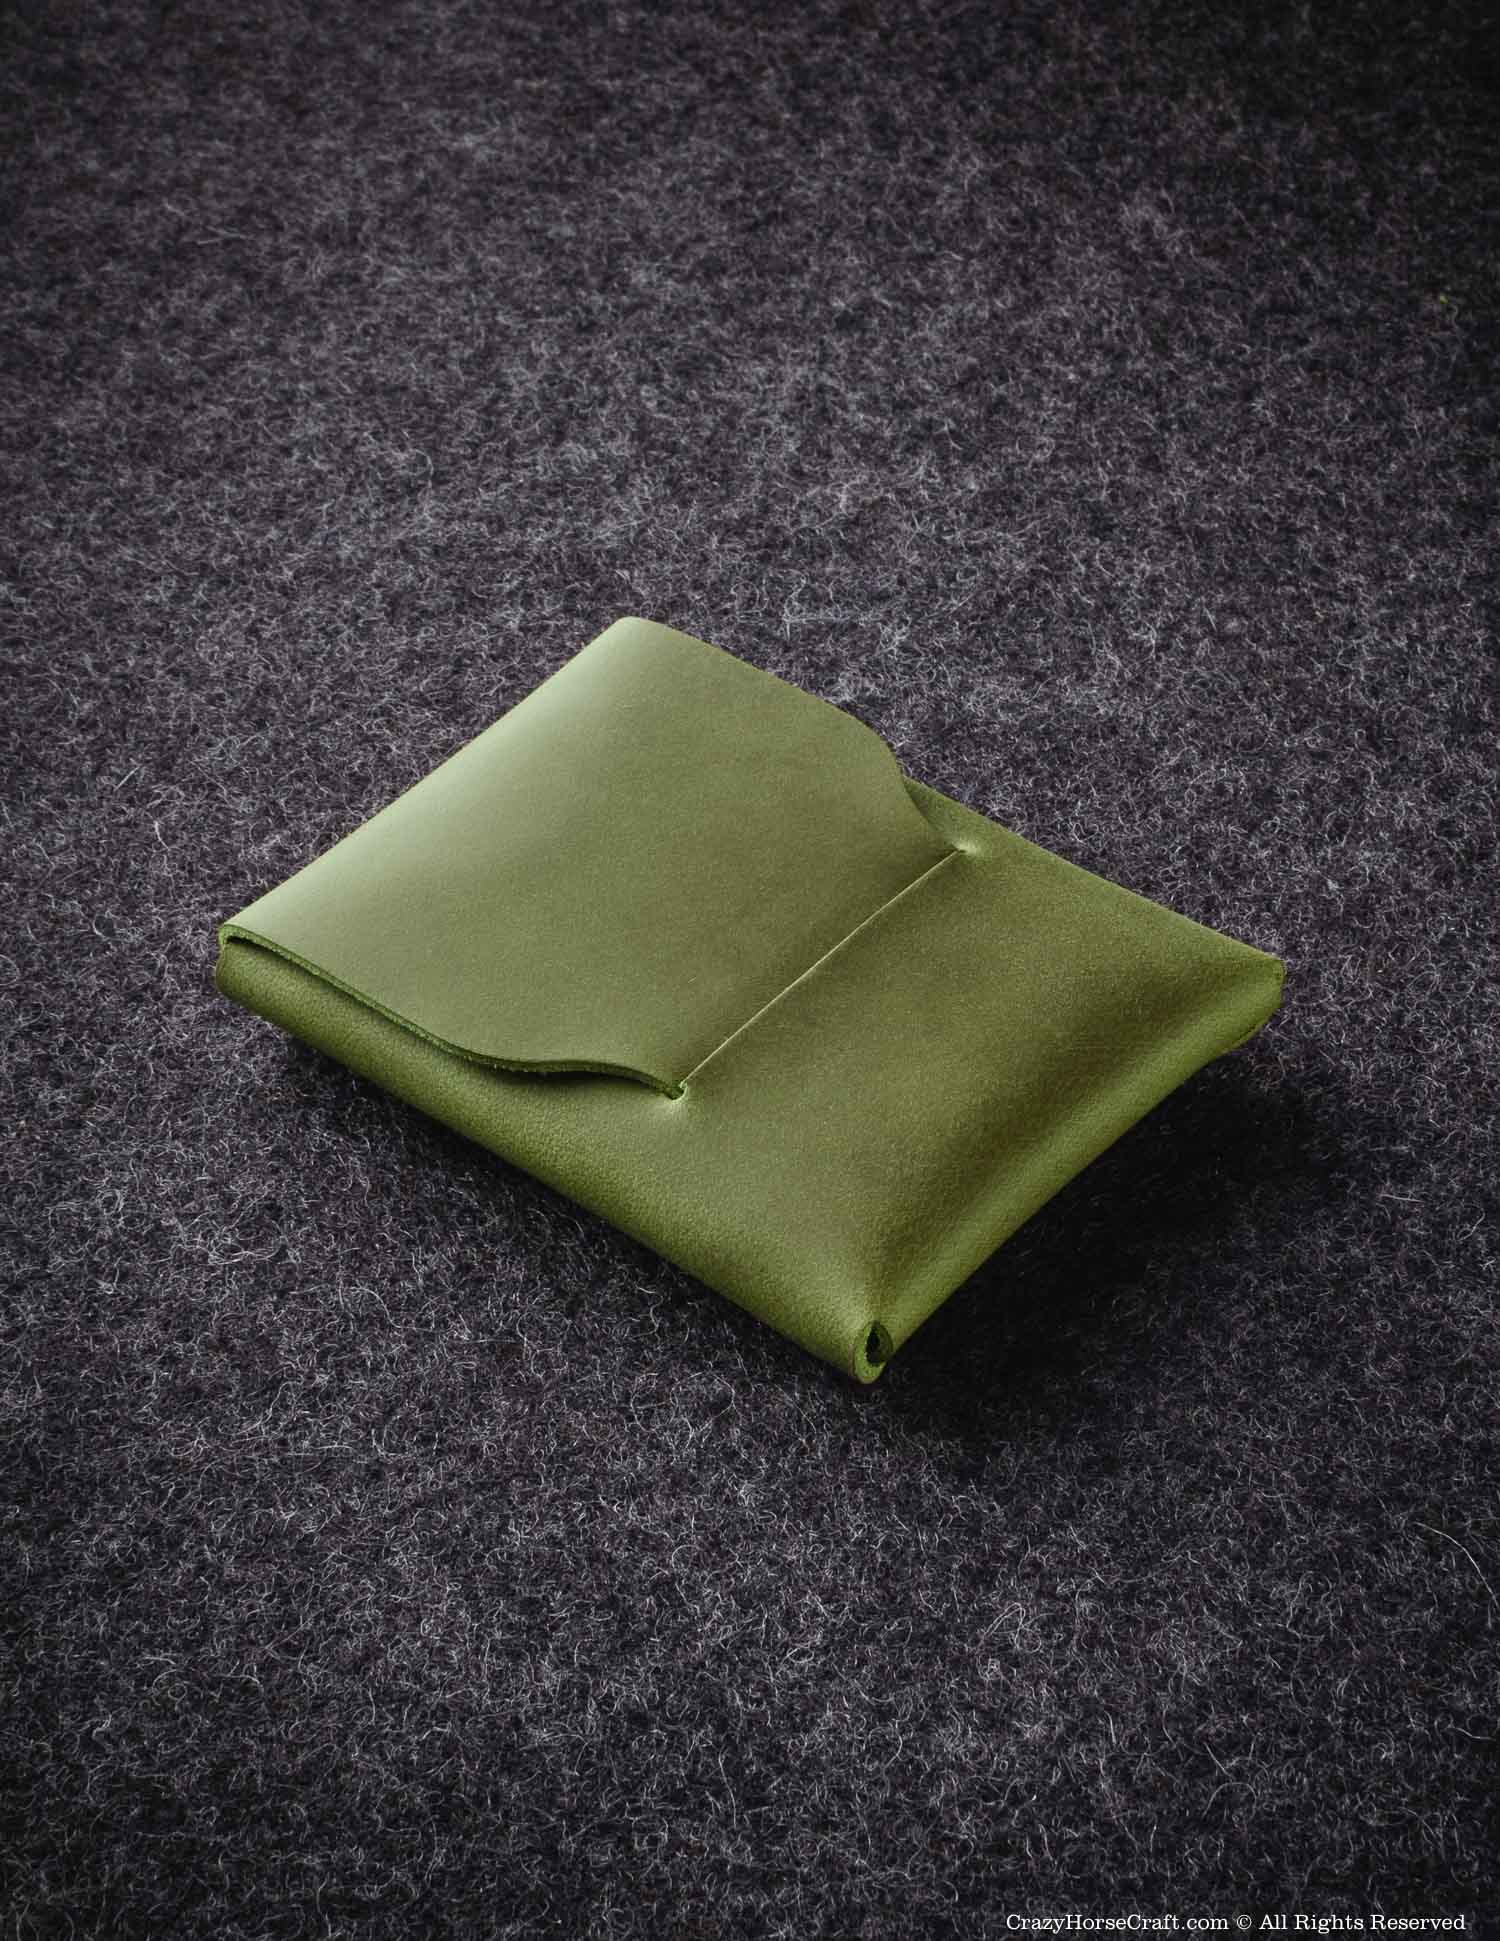 #color of the leather_alpine green